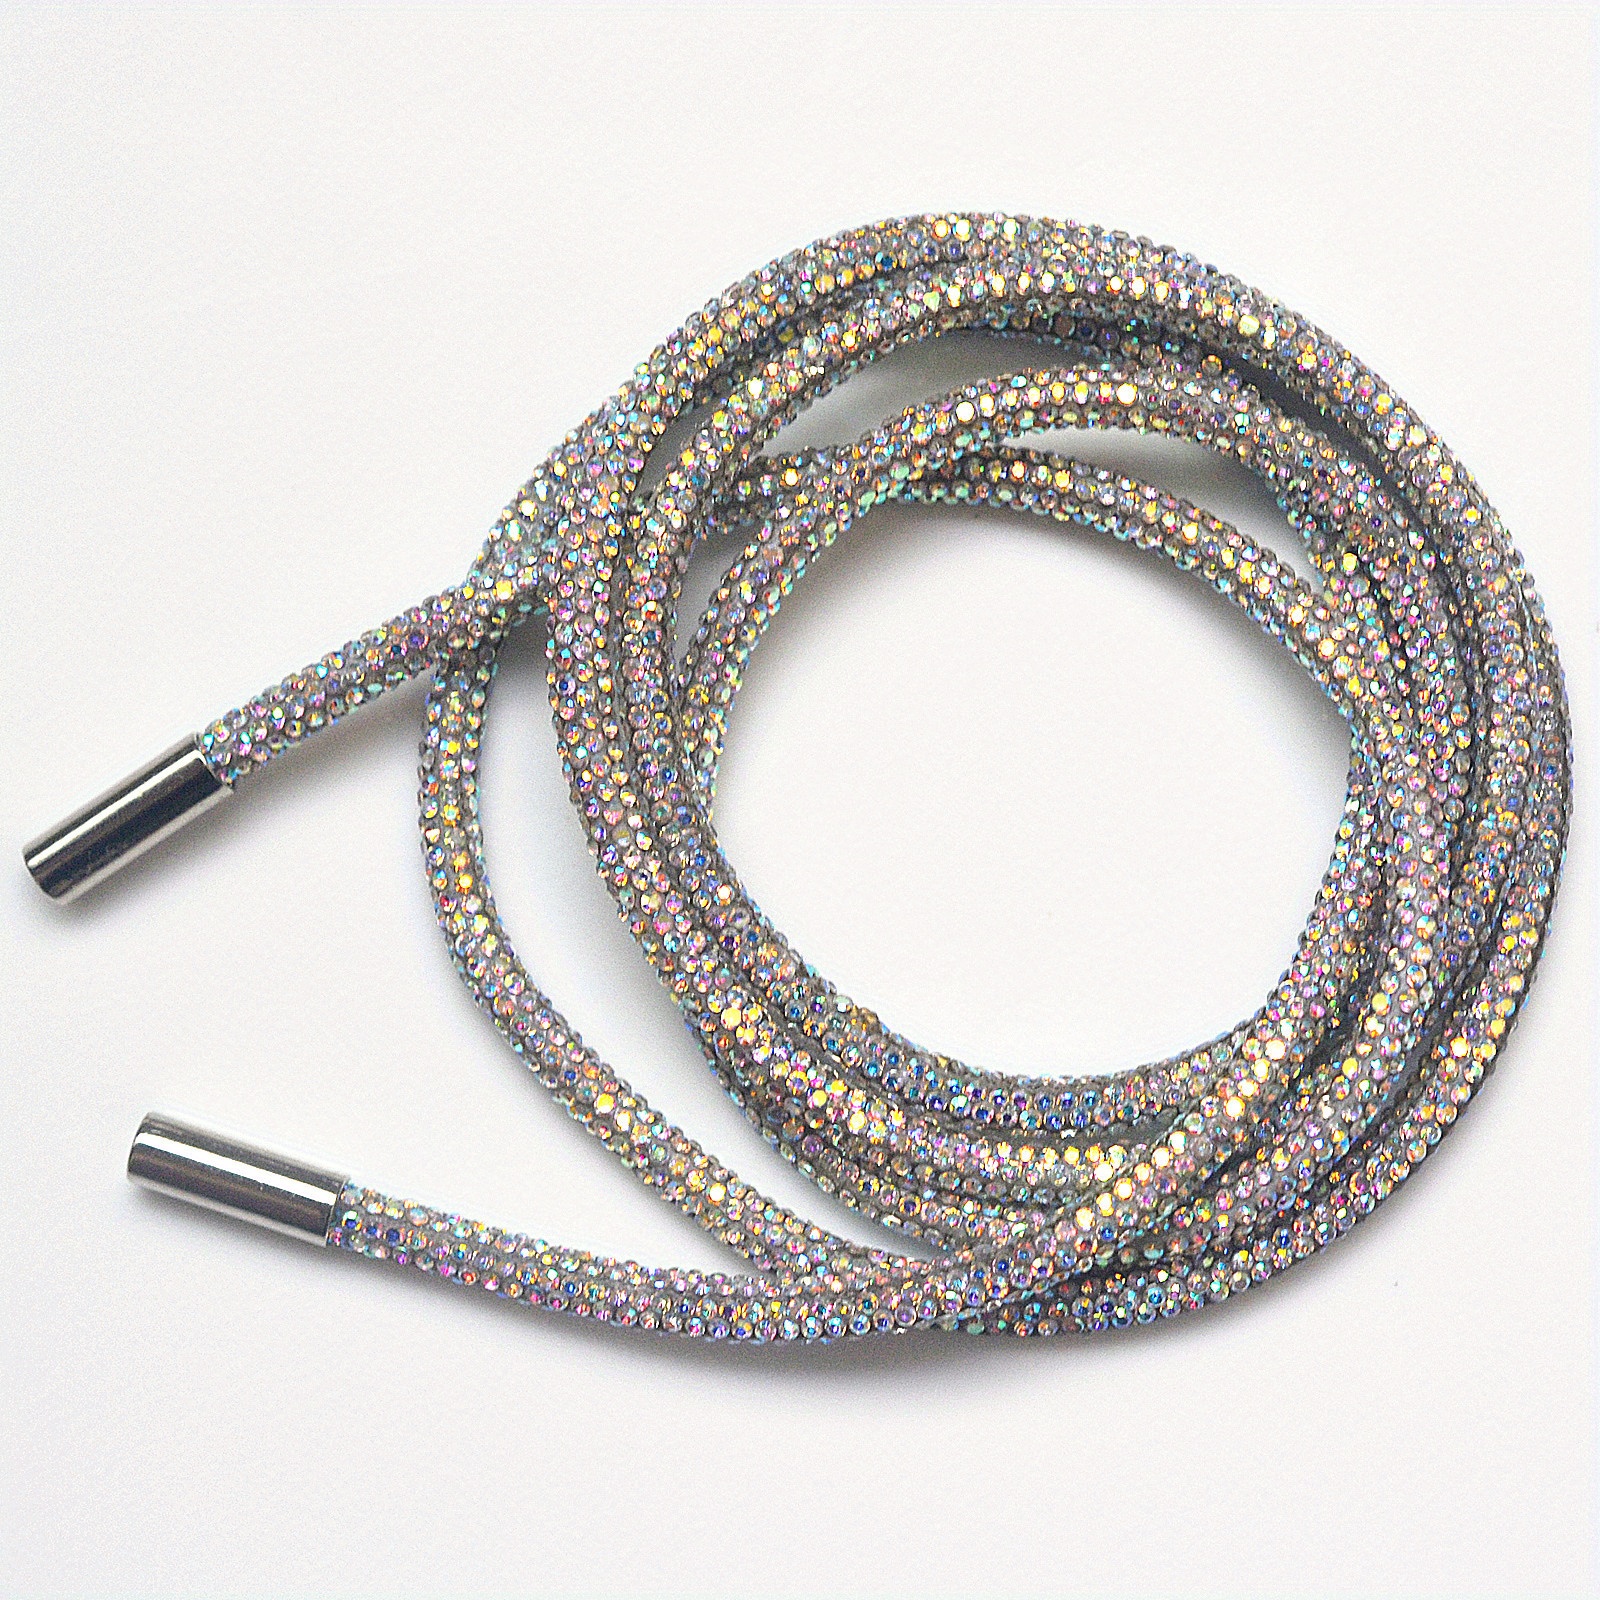 6mm Crystal Shoe Lace, hoodie lace Rhinestone String with metal tip, r –  Fifi's Craft